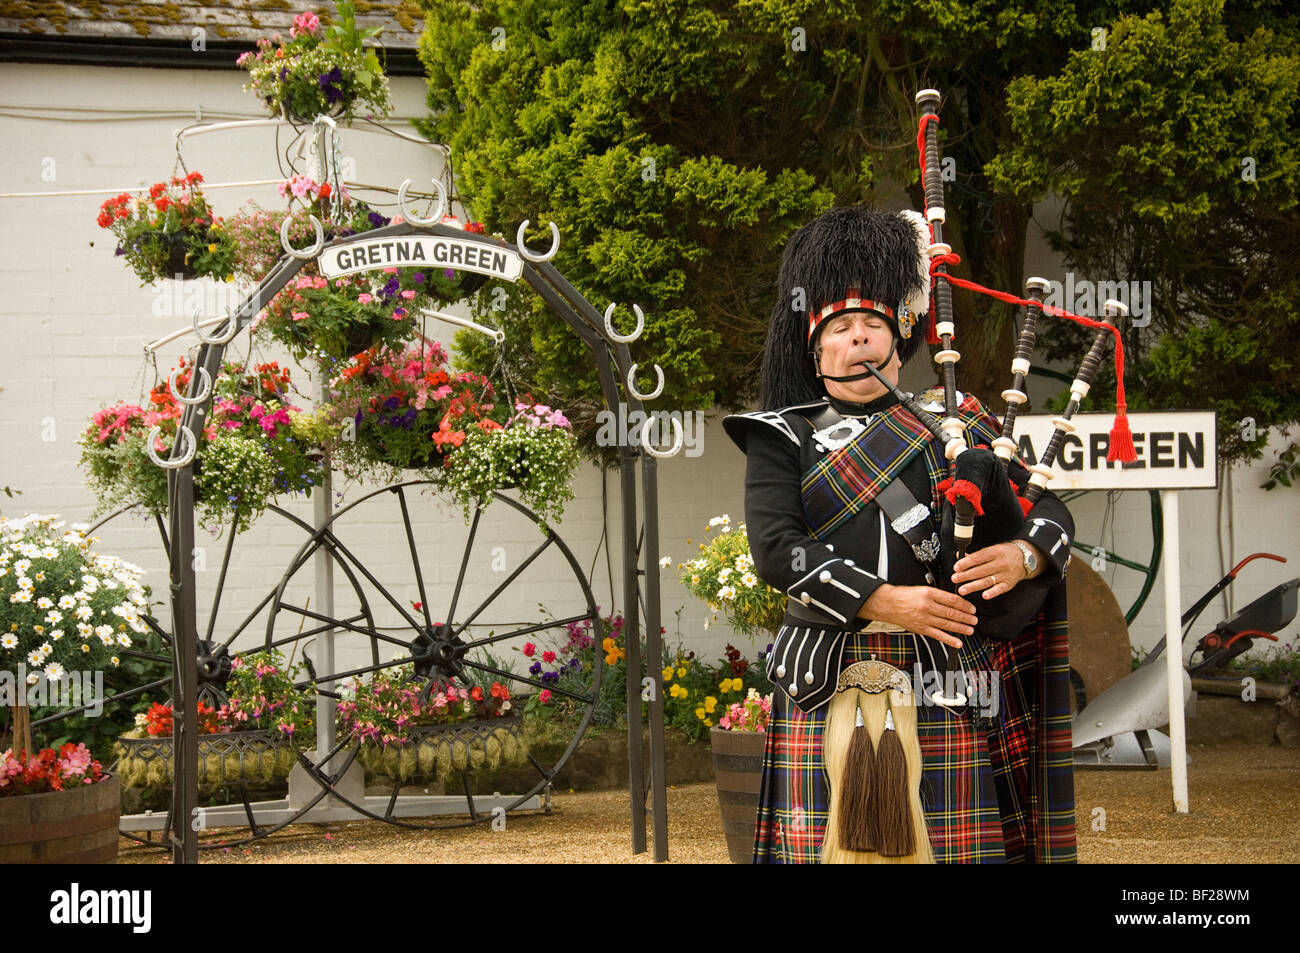 Caucasian Scottish male piper playing bagpipes outside the Gretna Green Old Blacksmith's shop, Scotland. UK Stock Photo